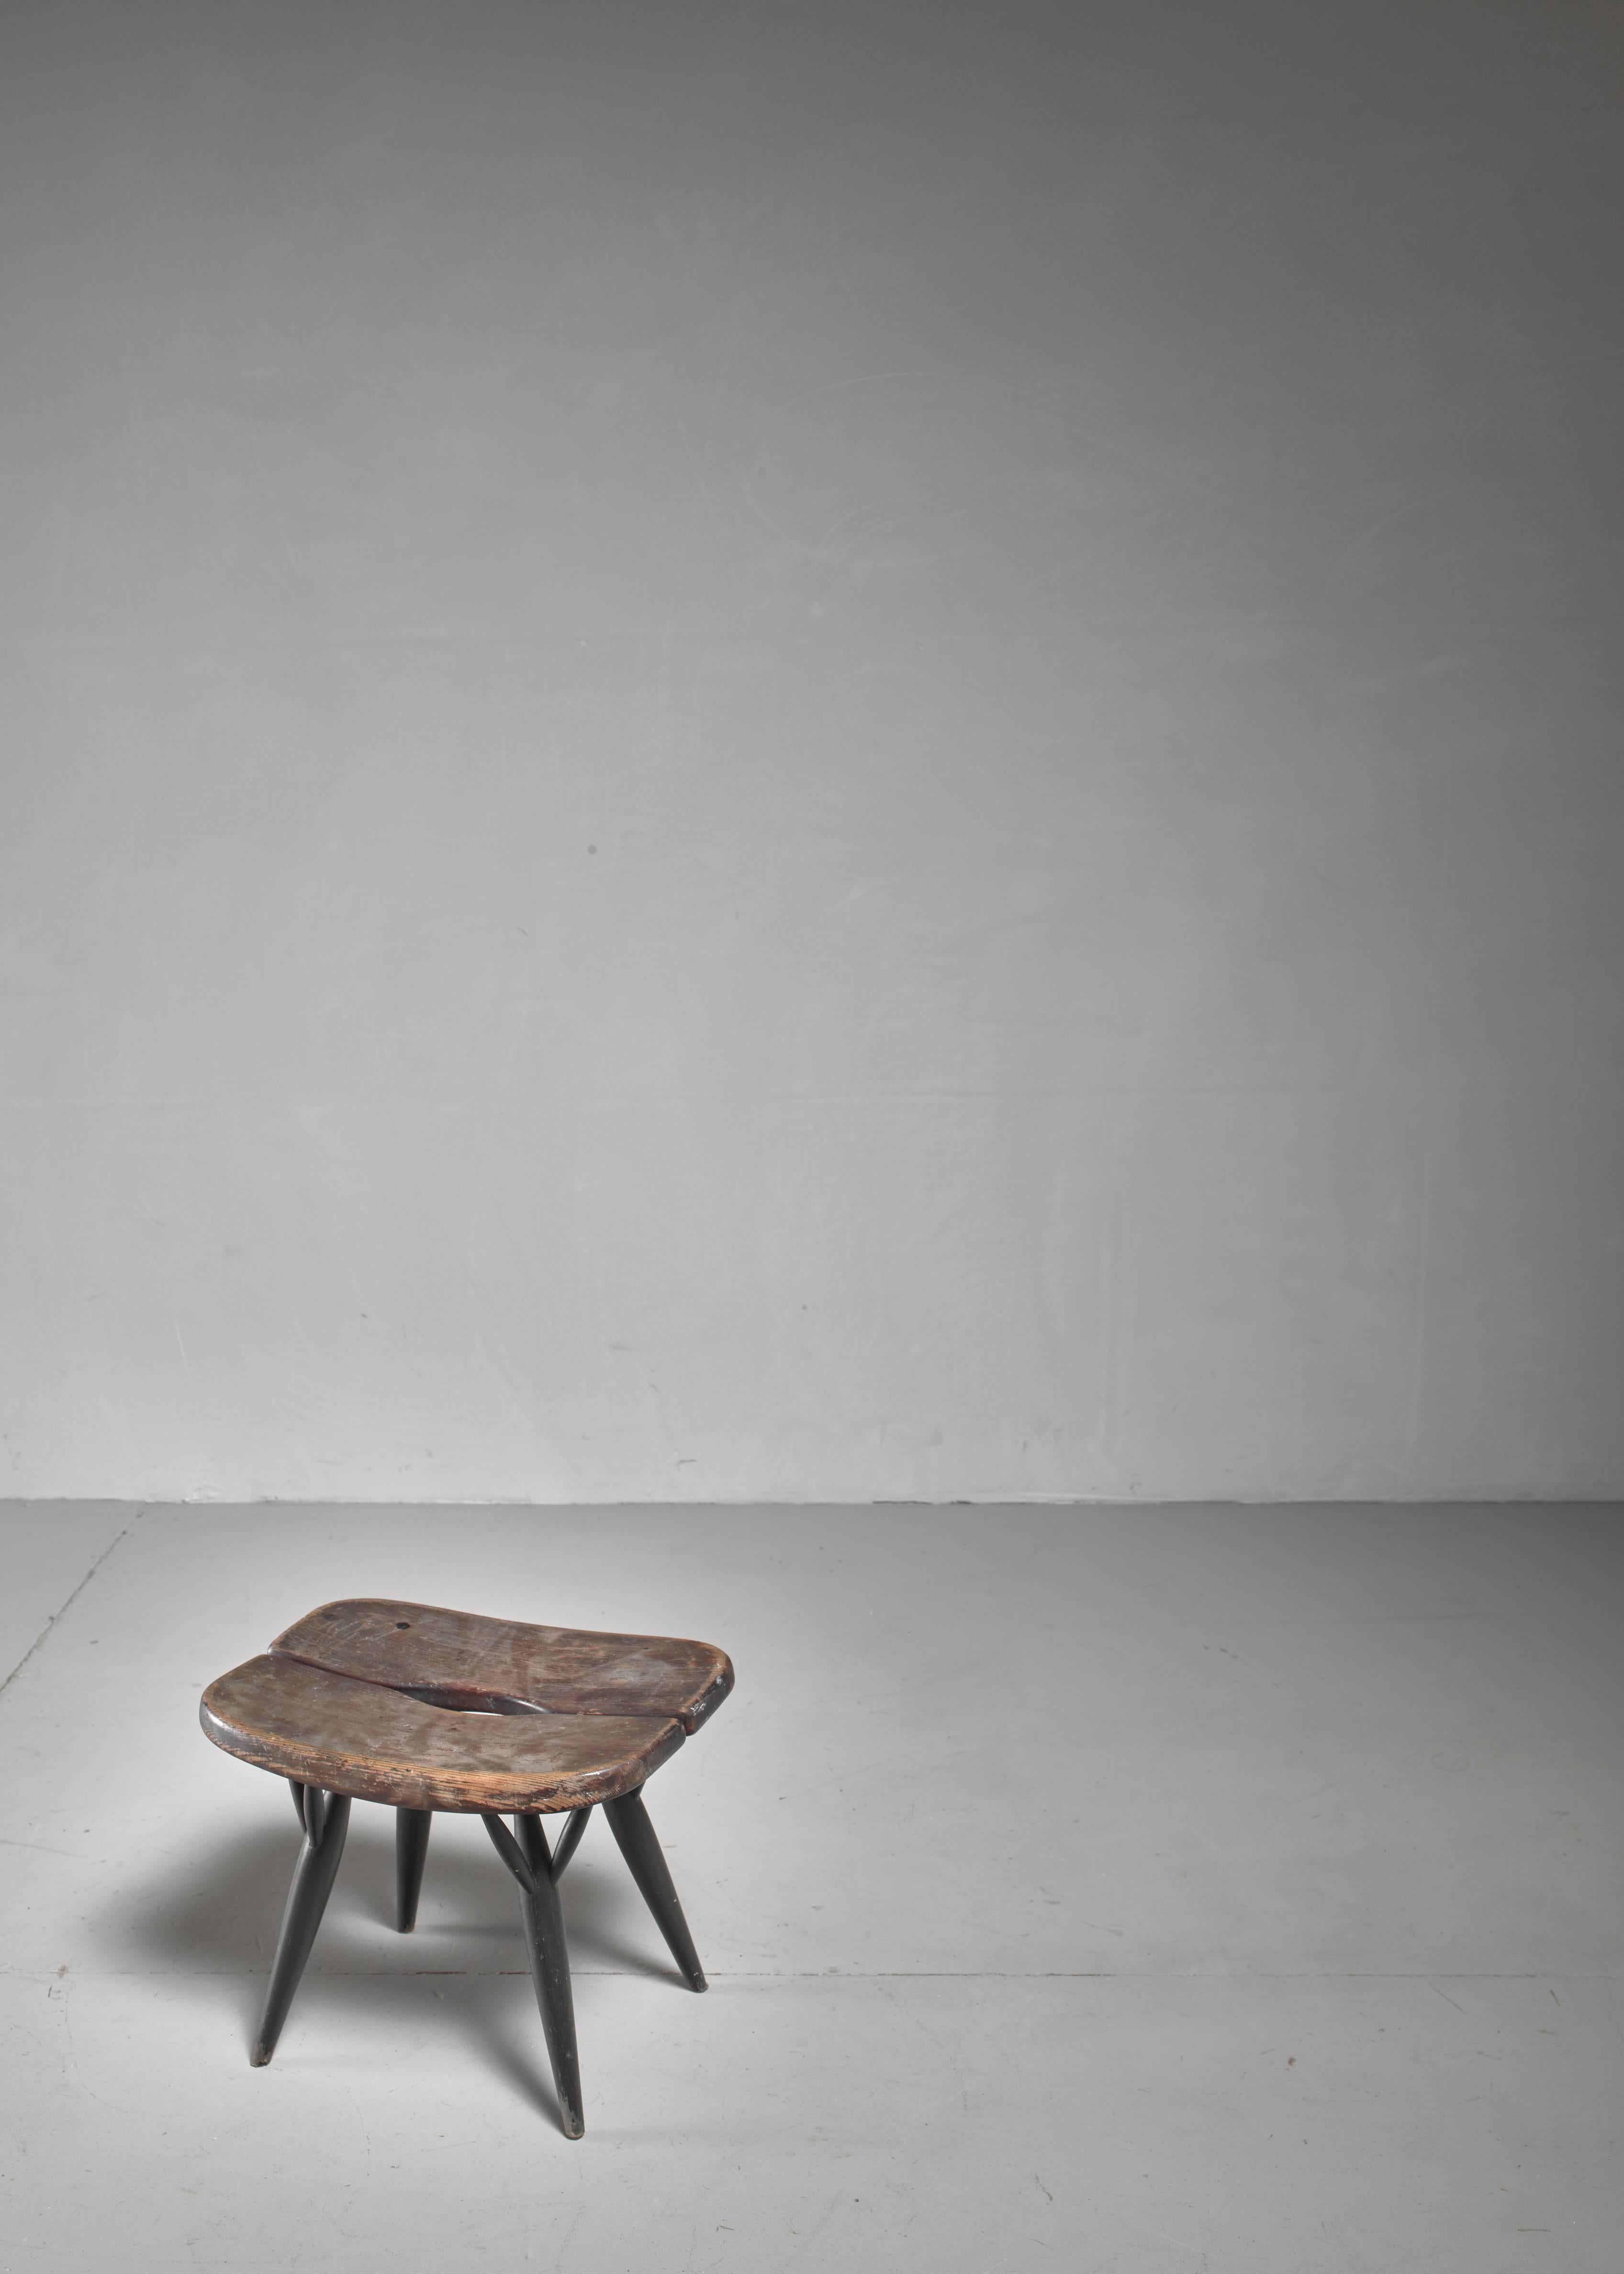 A low sauna stool in ebonized pine by Ilmari Tapiovaara for Asko. This is a lower version of the more common Pirkka stool.
Marked by Tapiovaara and Asko.